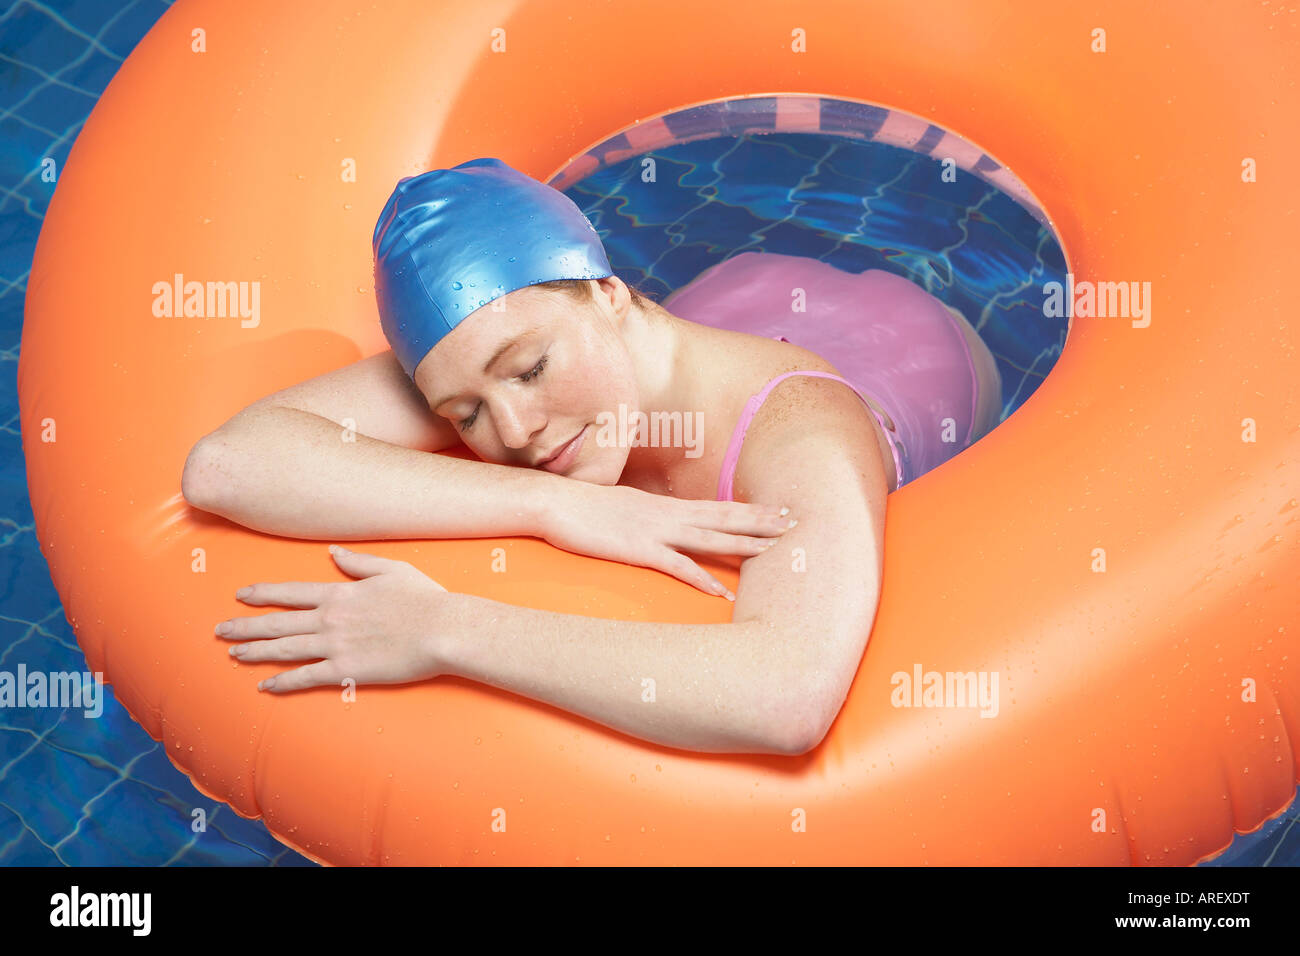 Woman resting in rubber ring Stock Photo